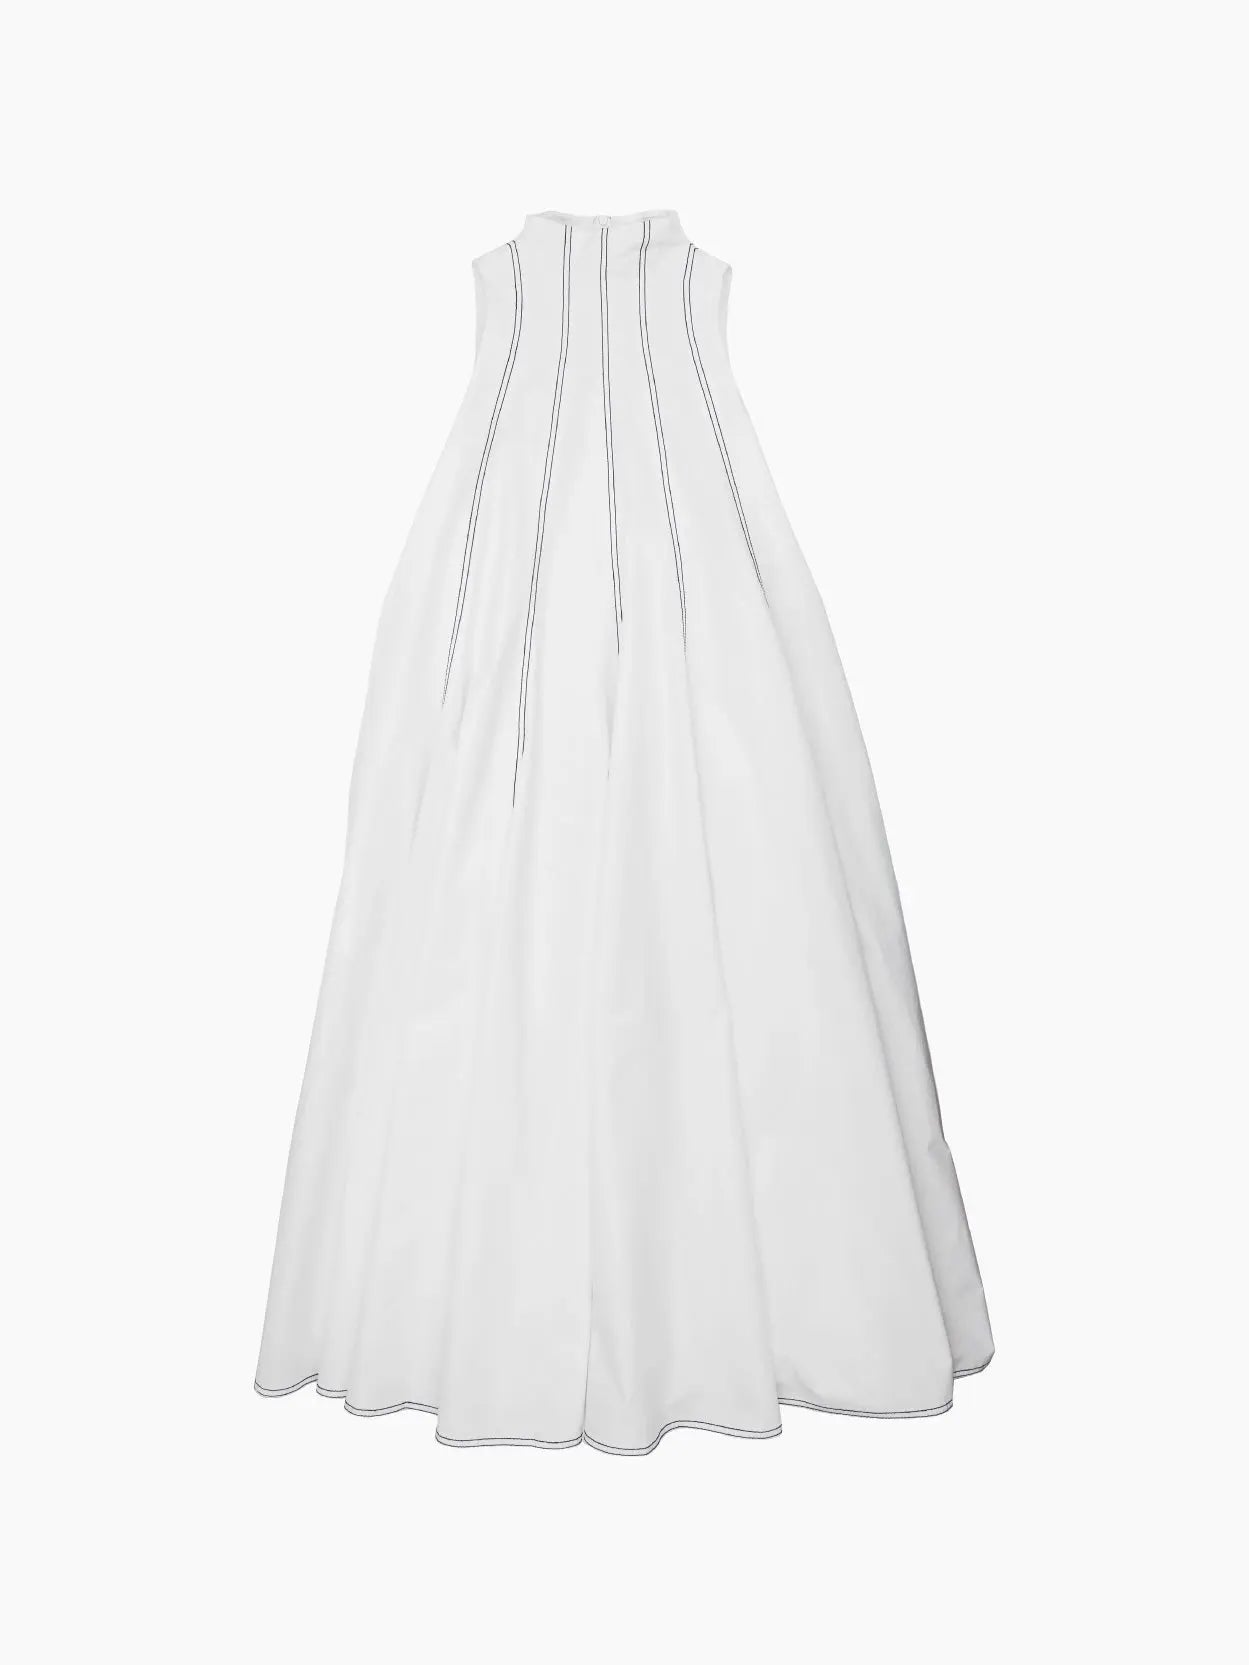 A Sunnei Tulipano Dress: a sleeveless white dress with a high neckline and a full, flowing skirt. The dress features vertical stitching details that run from the neckline down the bodice and along the skirt, creating a structured look. Available at BassalStore in Barcelona. The background is plain white.